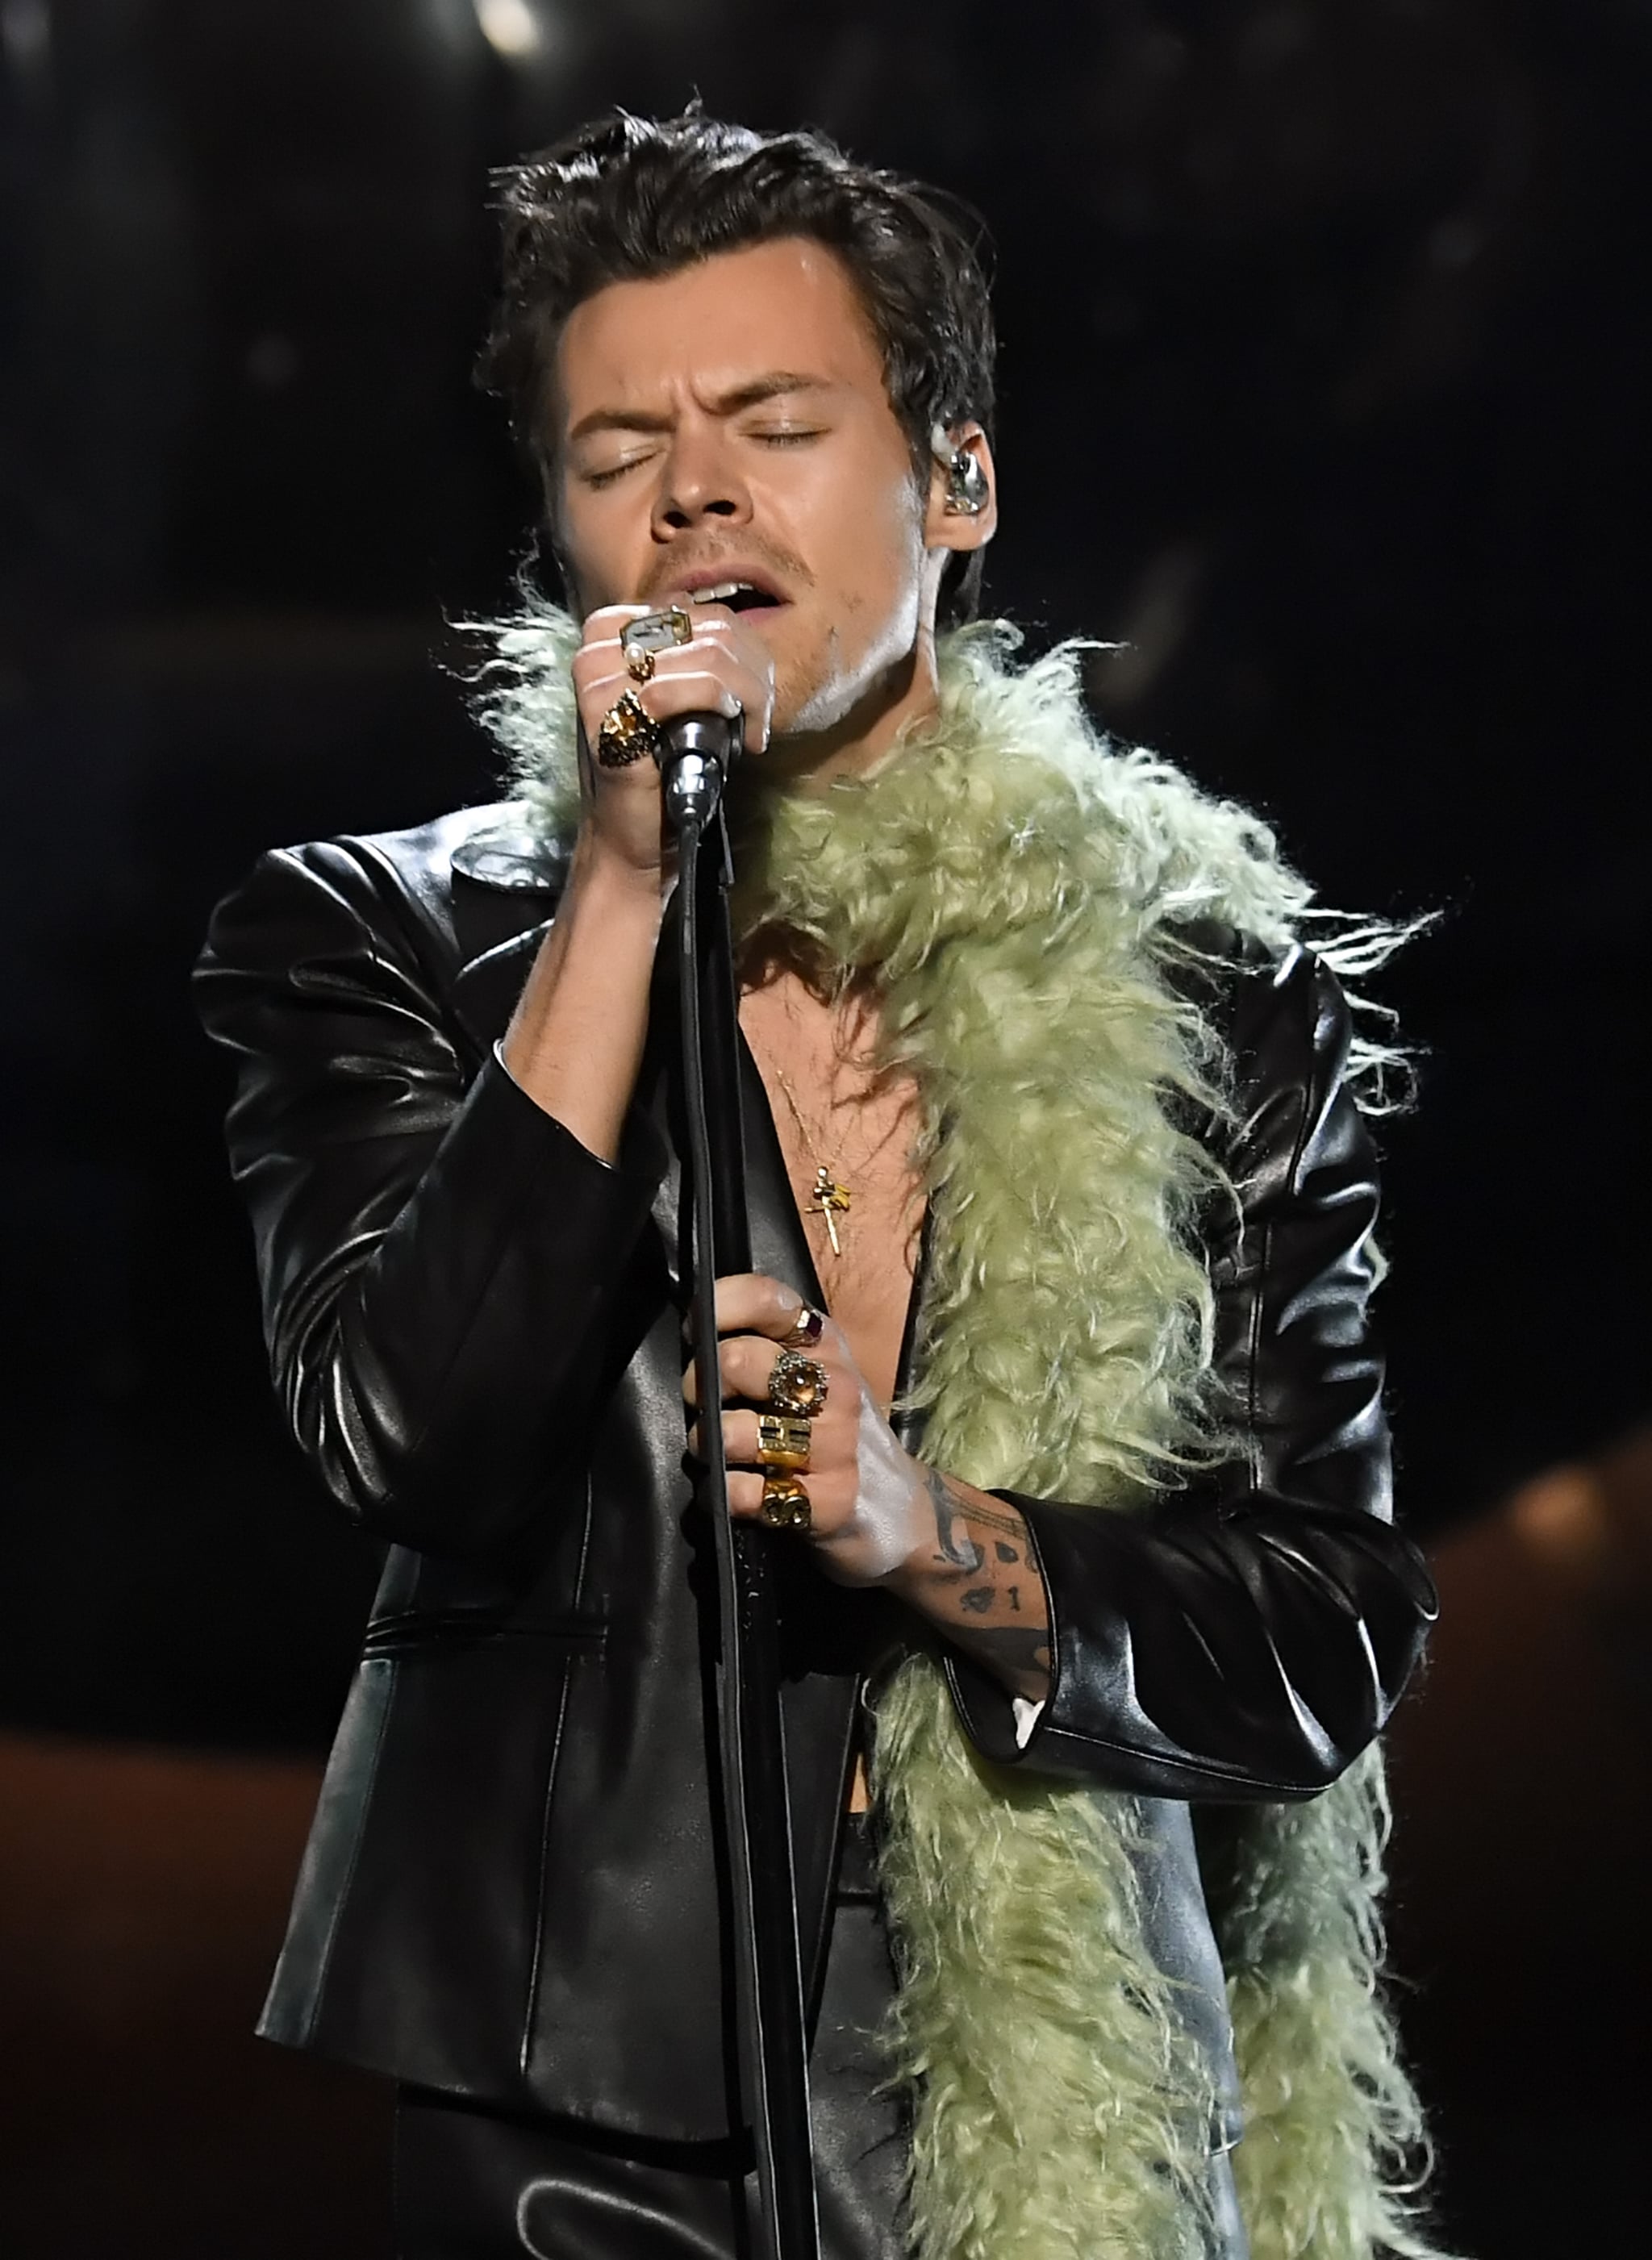 LOS ANGELES, CALIFORNIA: In this image released on March 14, Harry Styles performs onstage during the 63rd Annual GRAMMY Awards at Los Angeles Convention Centre in Los Angeles, California and broadcast on March 14, 2021. (Photo by Kevin Winter/Getty Images for The Recording Academy)